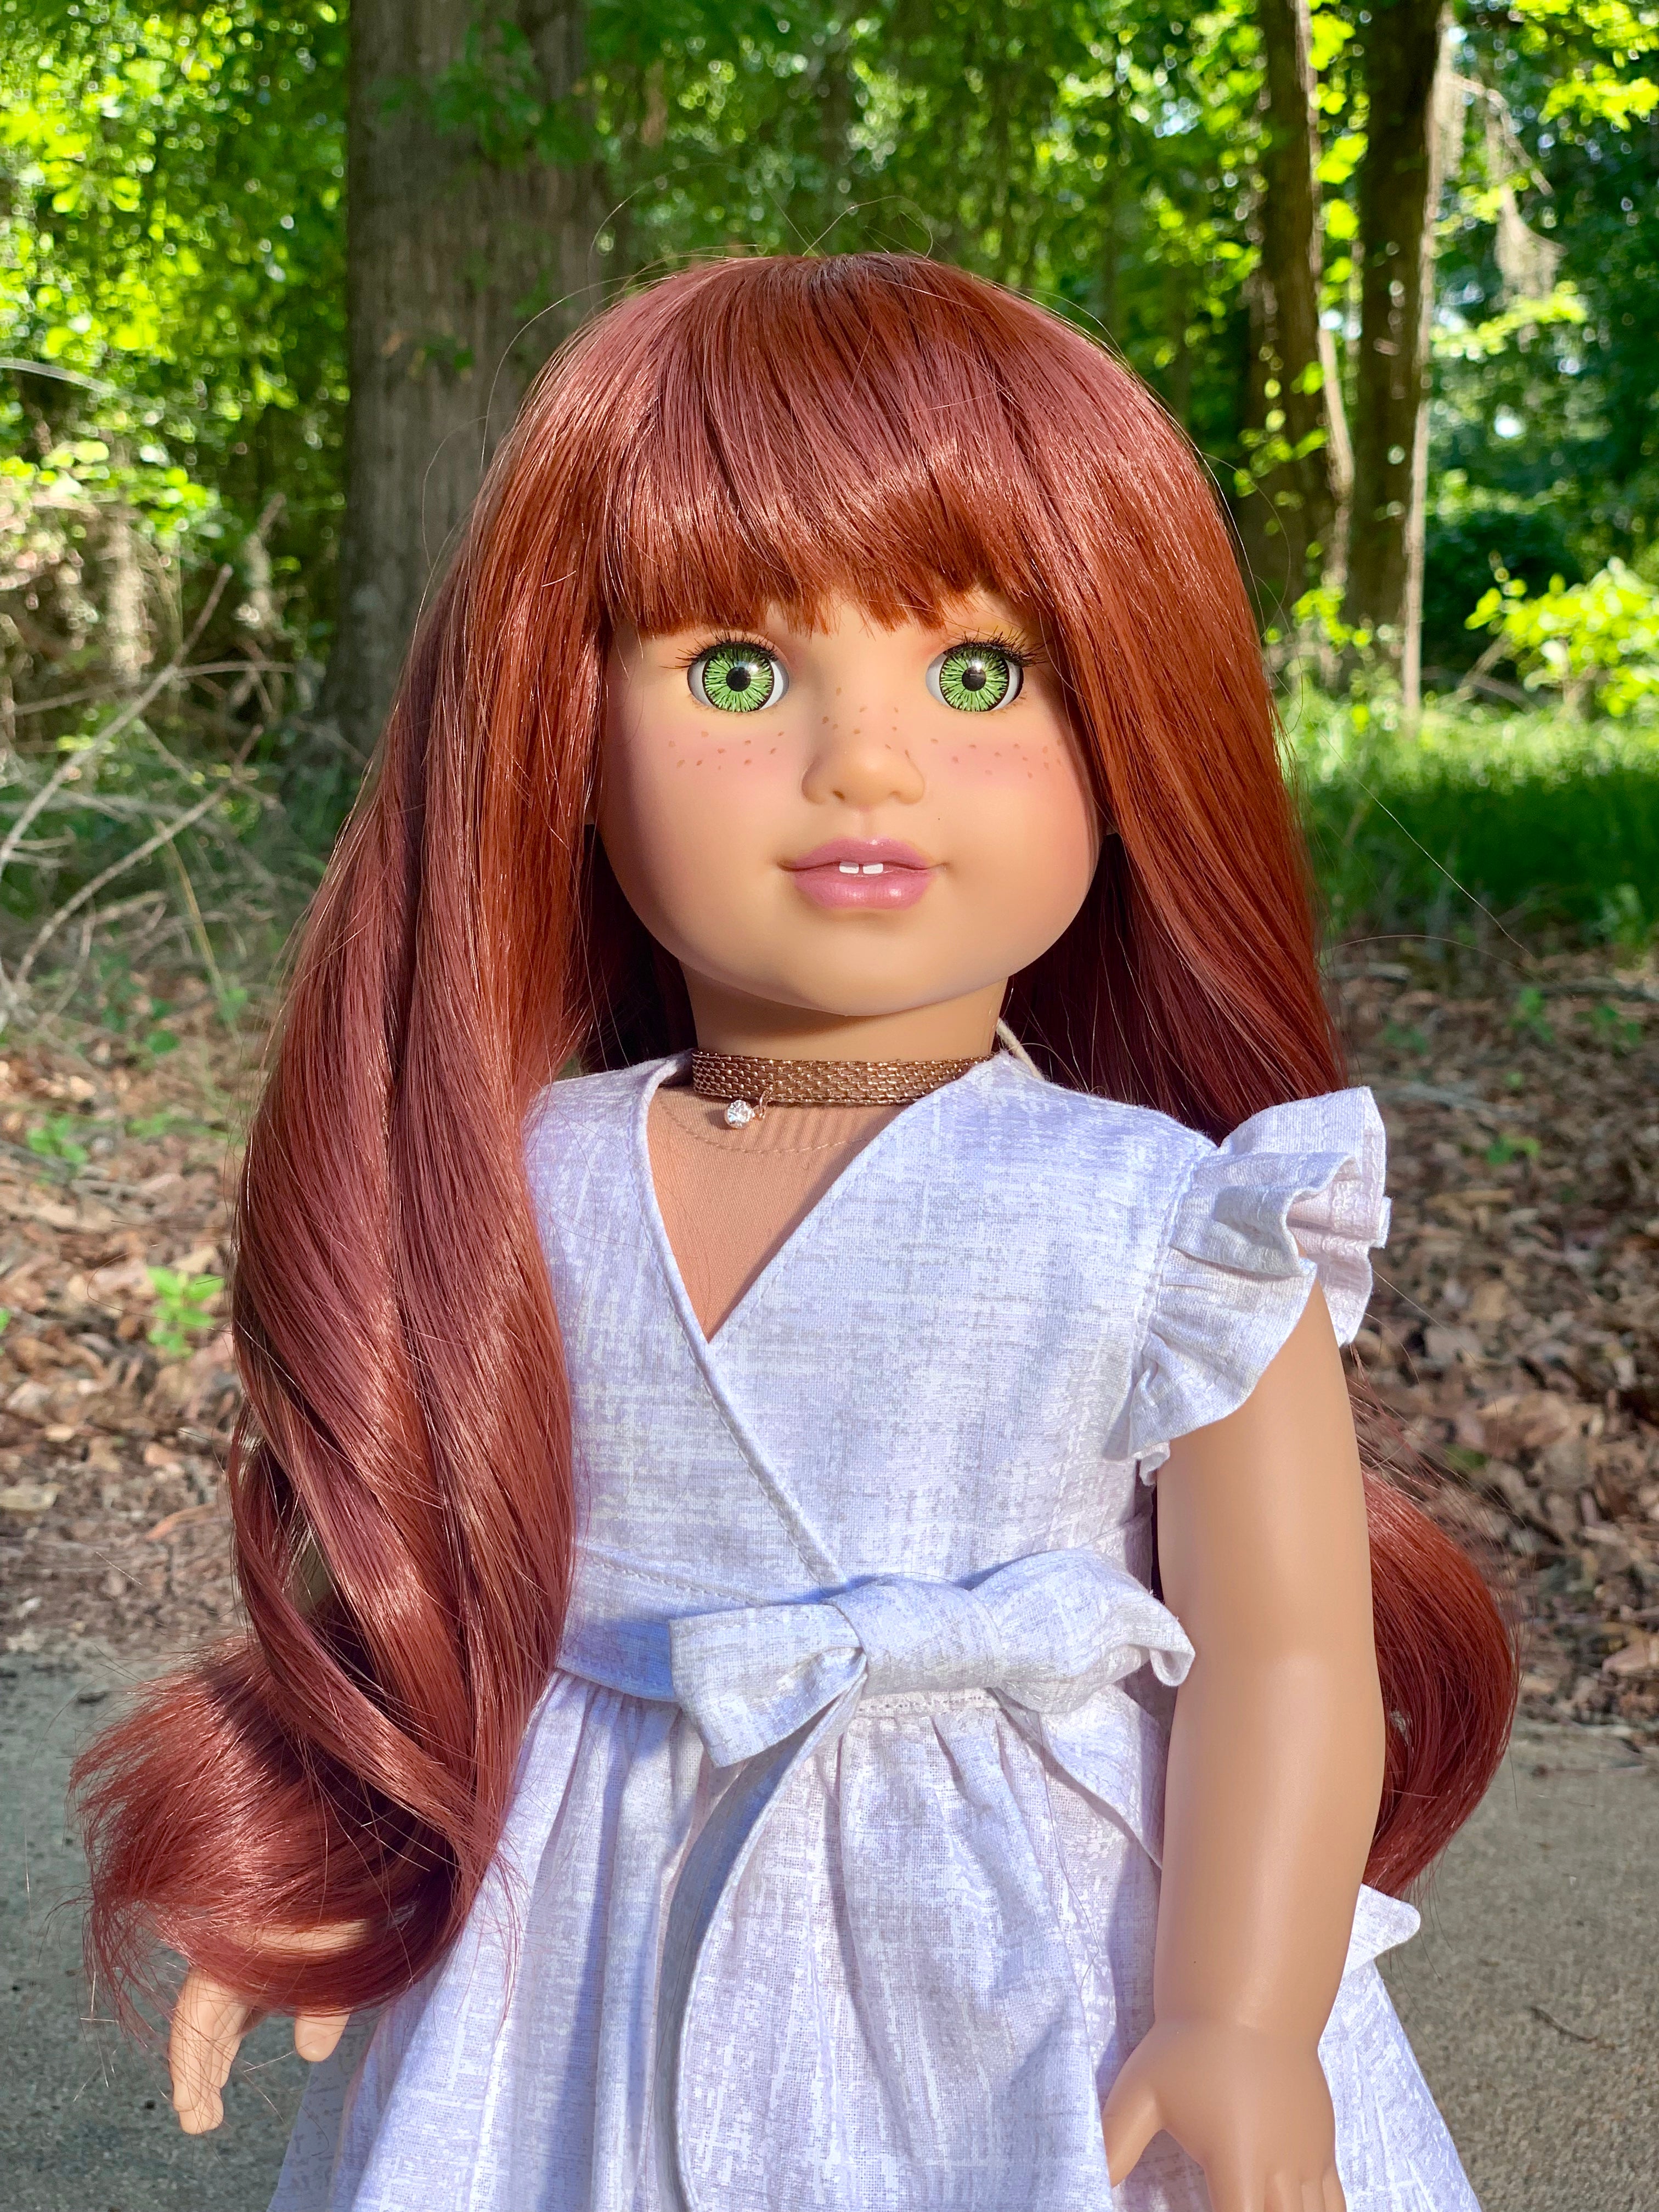 Zazou Dolls Exclusive WIG Crimson for 18 Inch dolls such as Journey, OG and American Girl